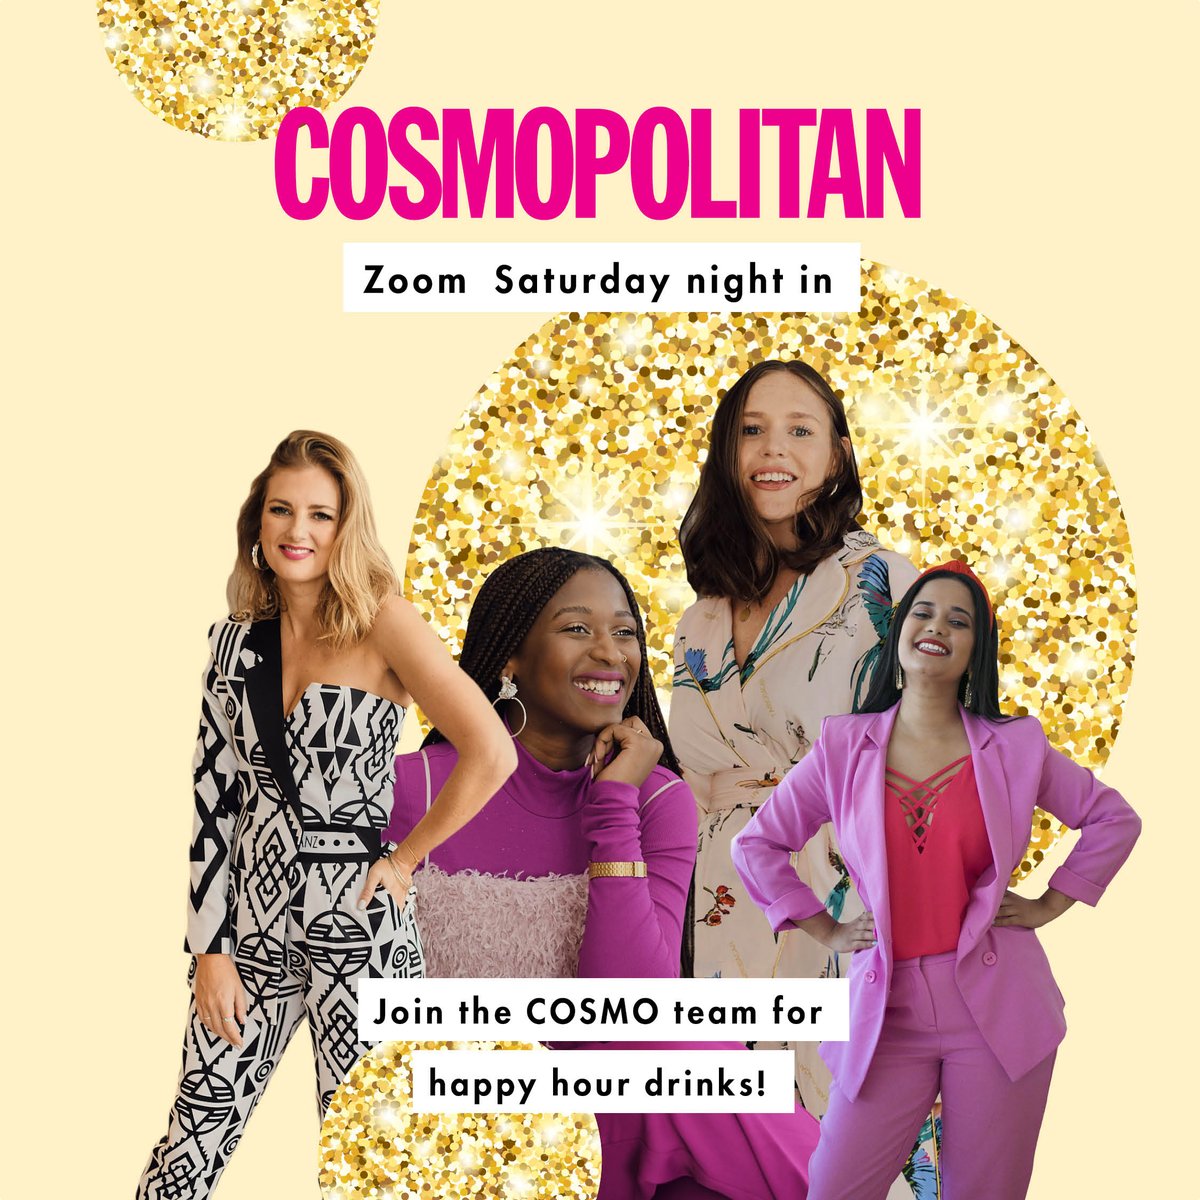 Join us tomorrow live on Zoom at 6pm! 💞 We’ll be making some cocktails (because, home happy hour is now a very necessary thing 🍹) and we’ll share a few tips on how we’re coping with self-isolation! ✨ There will also be a Q&A session! See you then! Link: zoom.us/j/6437969547